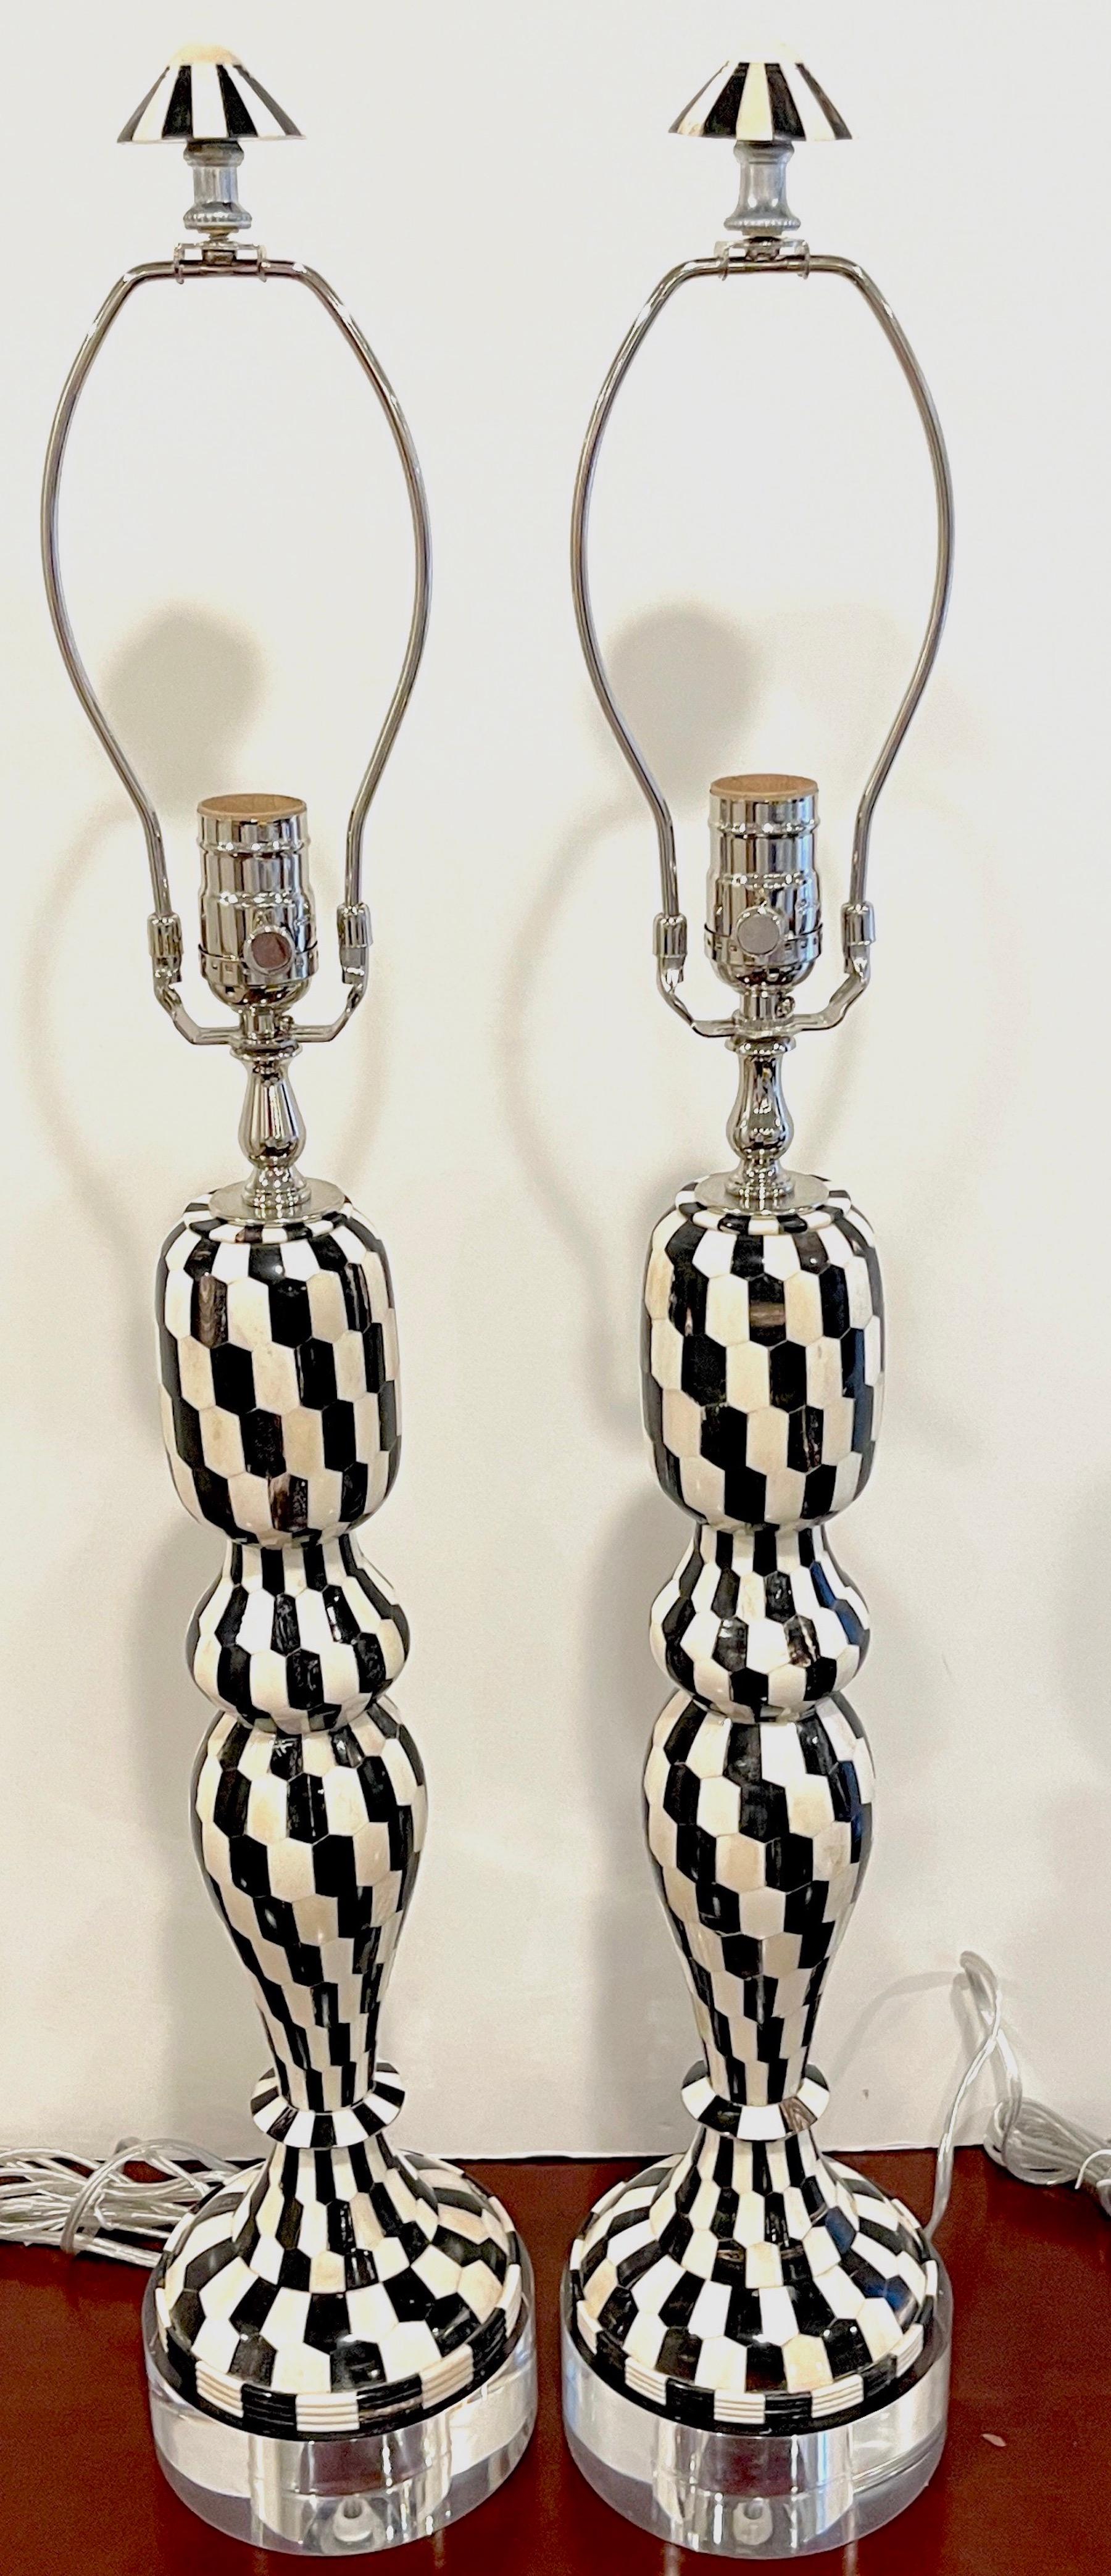 Pair of modern chevron pattern black & white tessellated stone & lucite lamps.
Complete with harps and matching finials 

Each one undulating column, inlaid with a black and white tessellated black and white stone mosaics, arranged in the